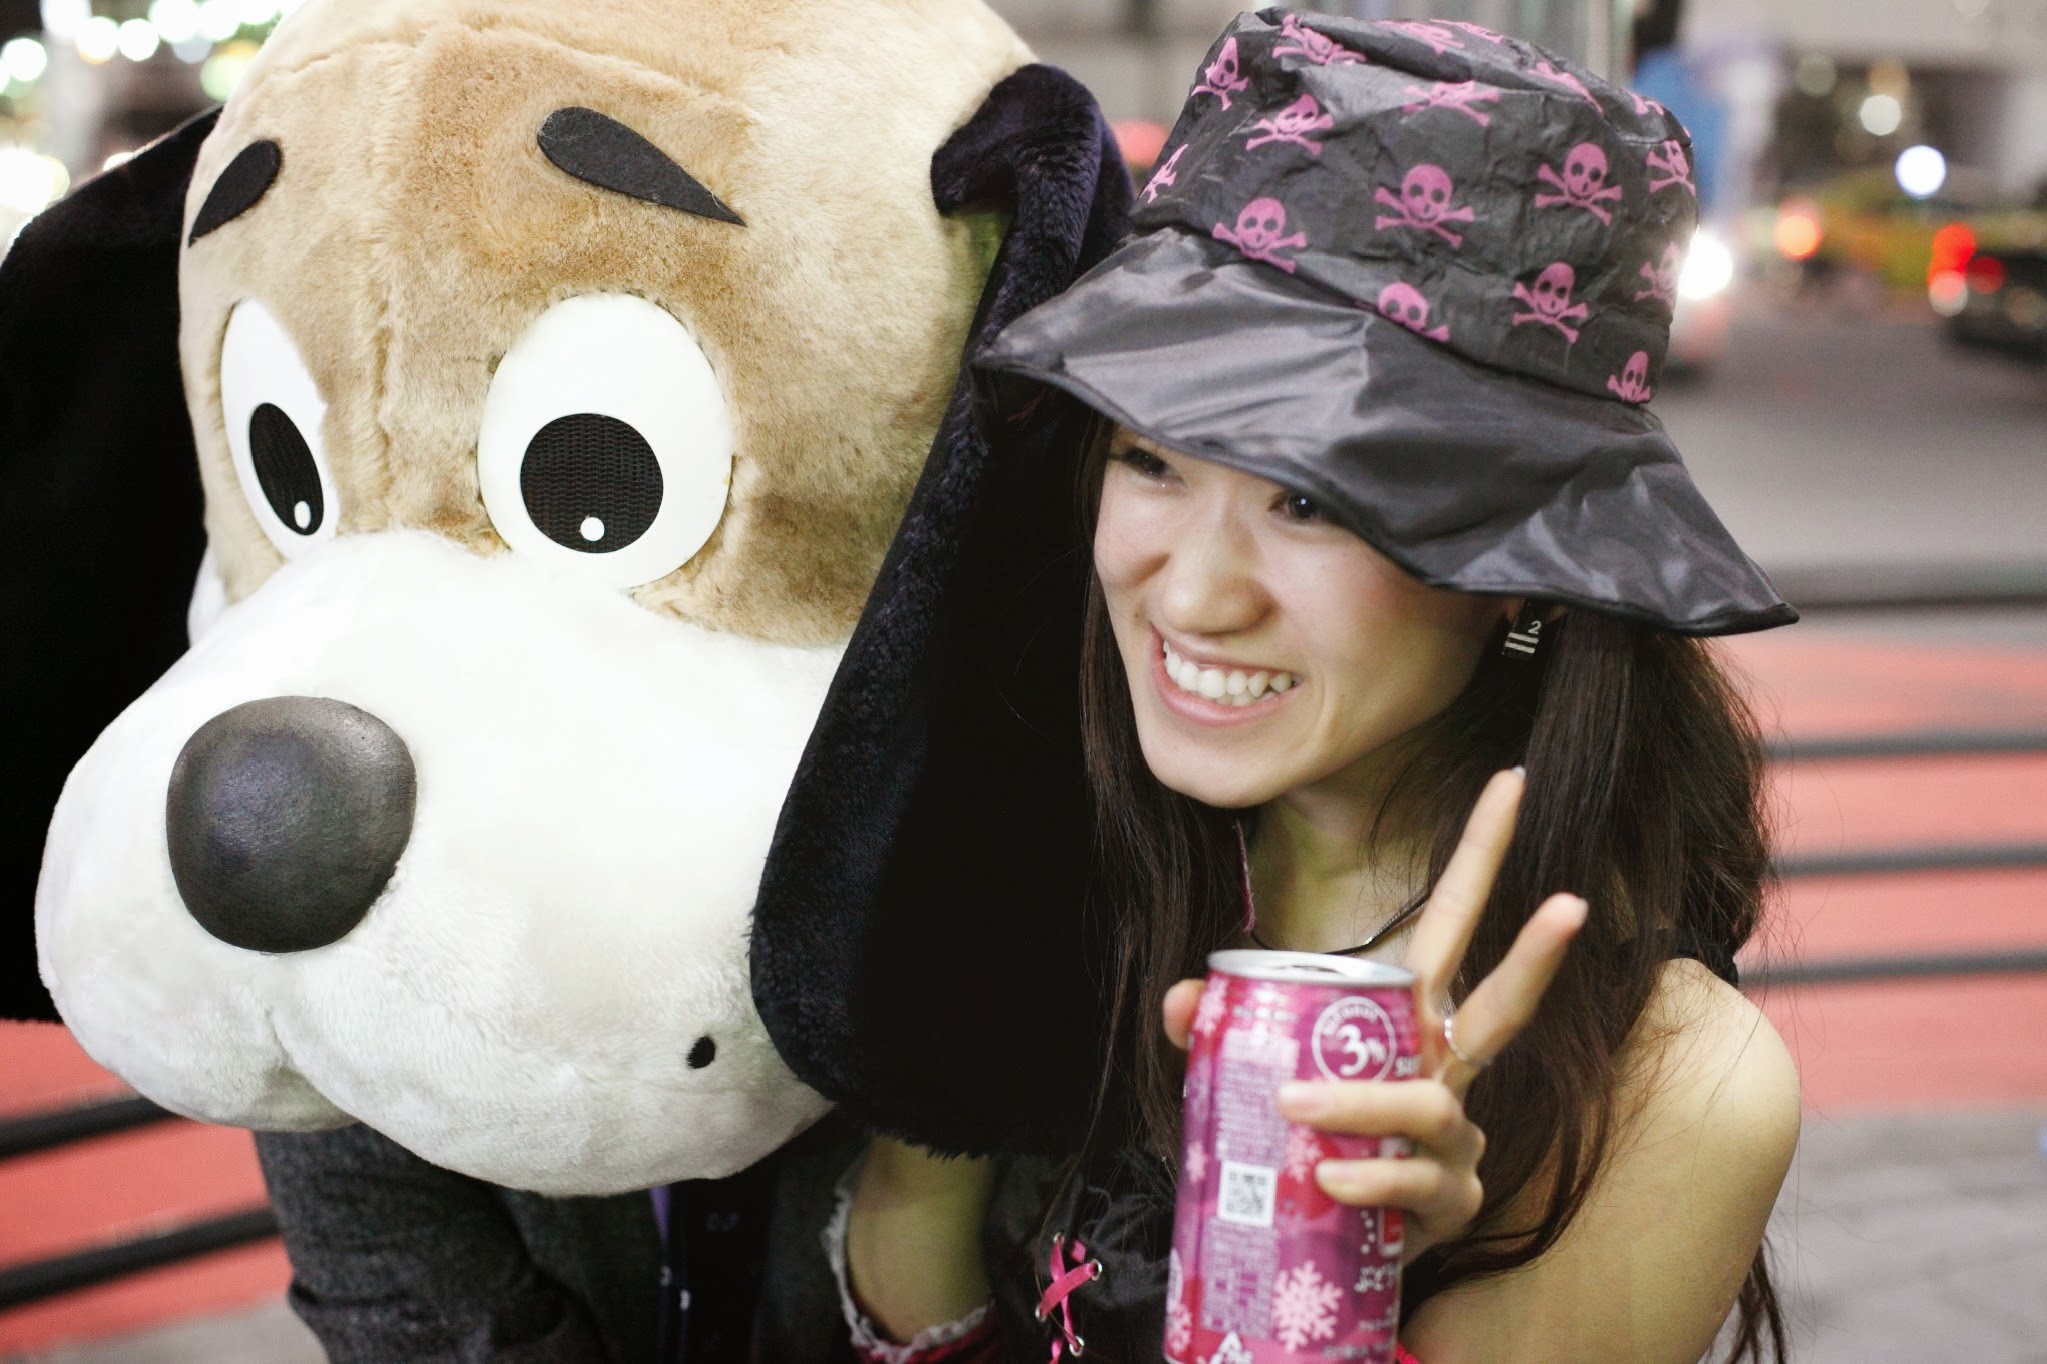 picture of a girl with a large, stuffed dog toy